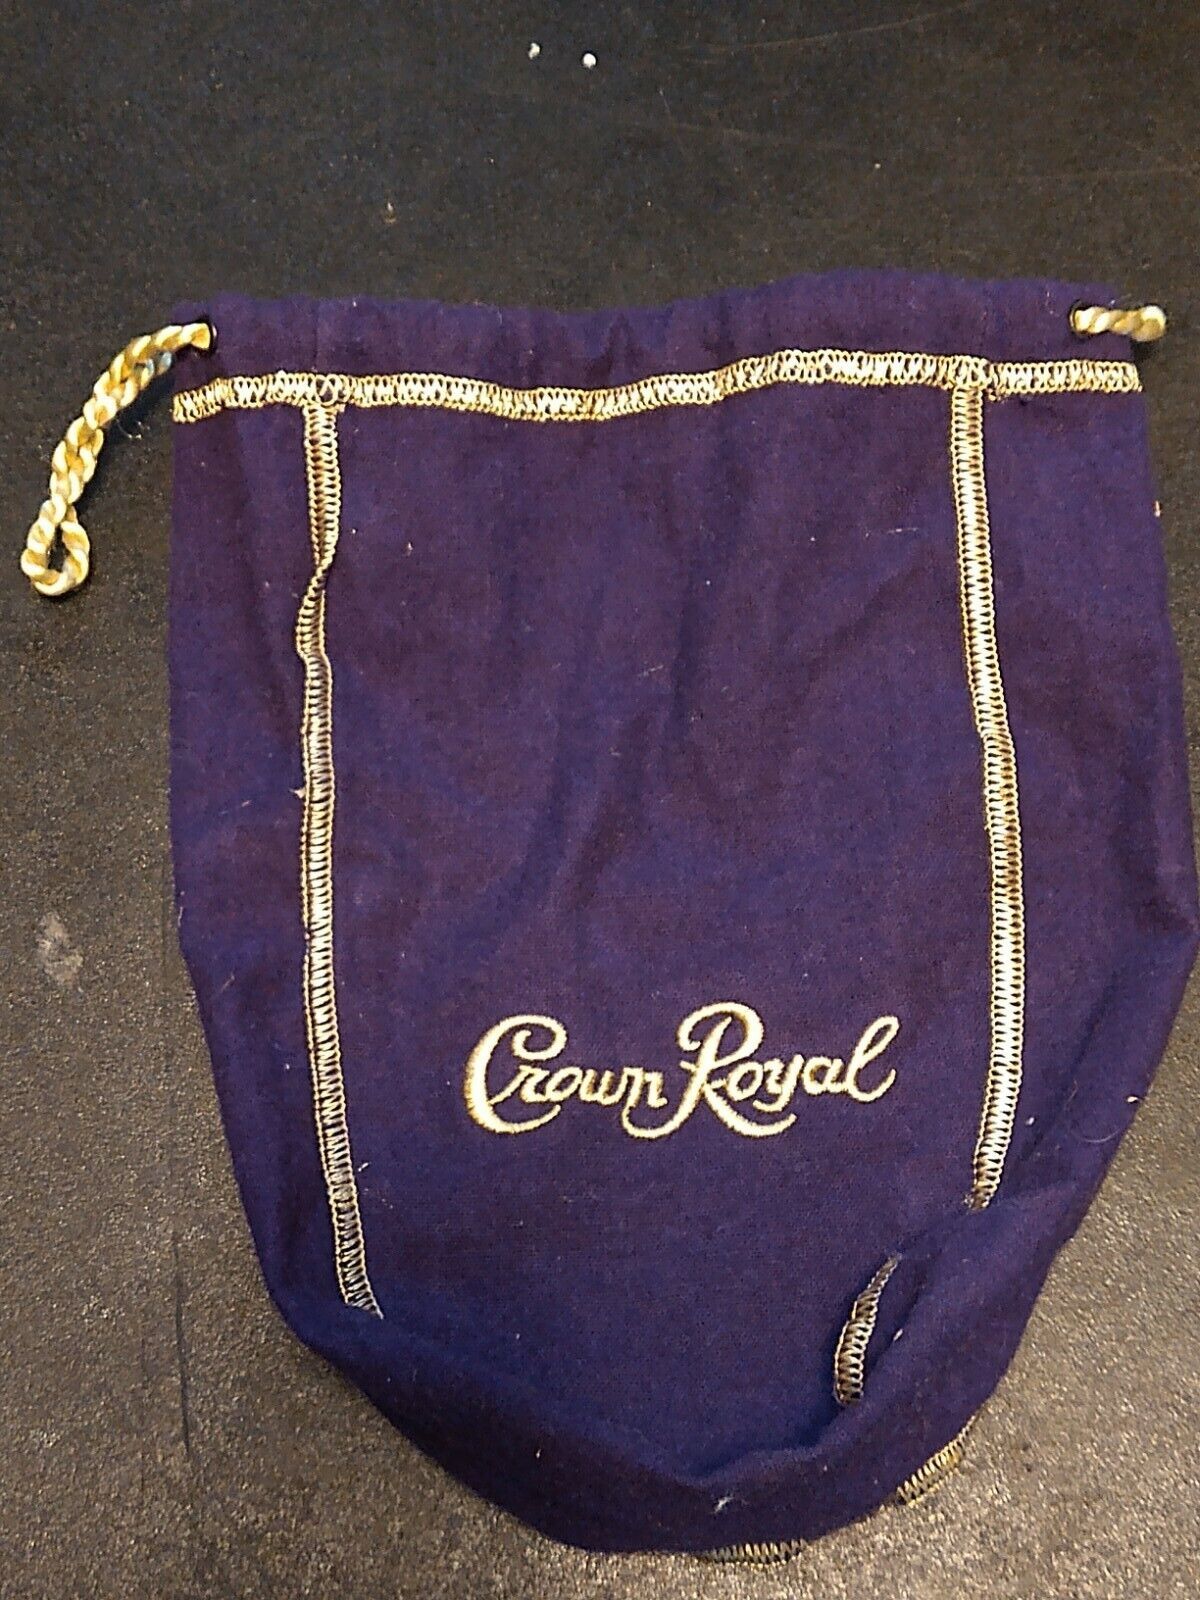 Primary image for Crown Royal Pouch 9" Purple Gold Drawstring Bag Collectable